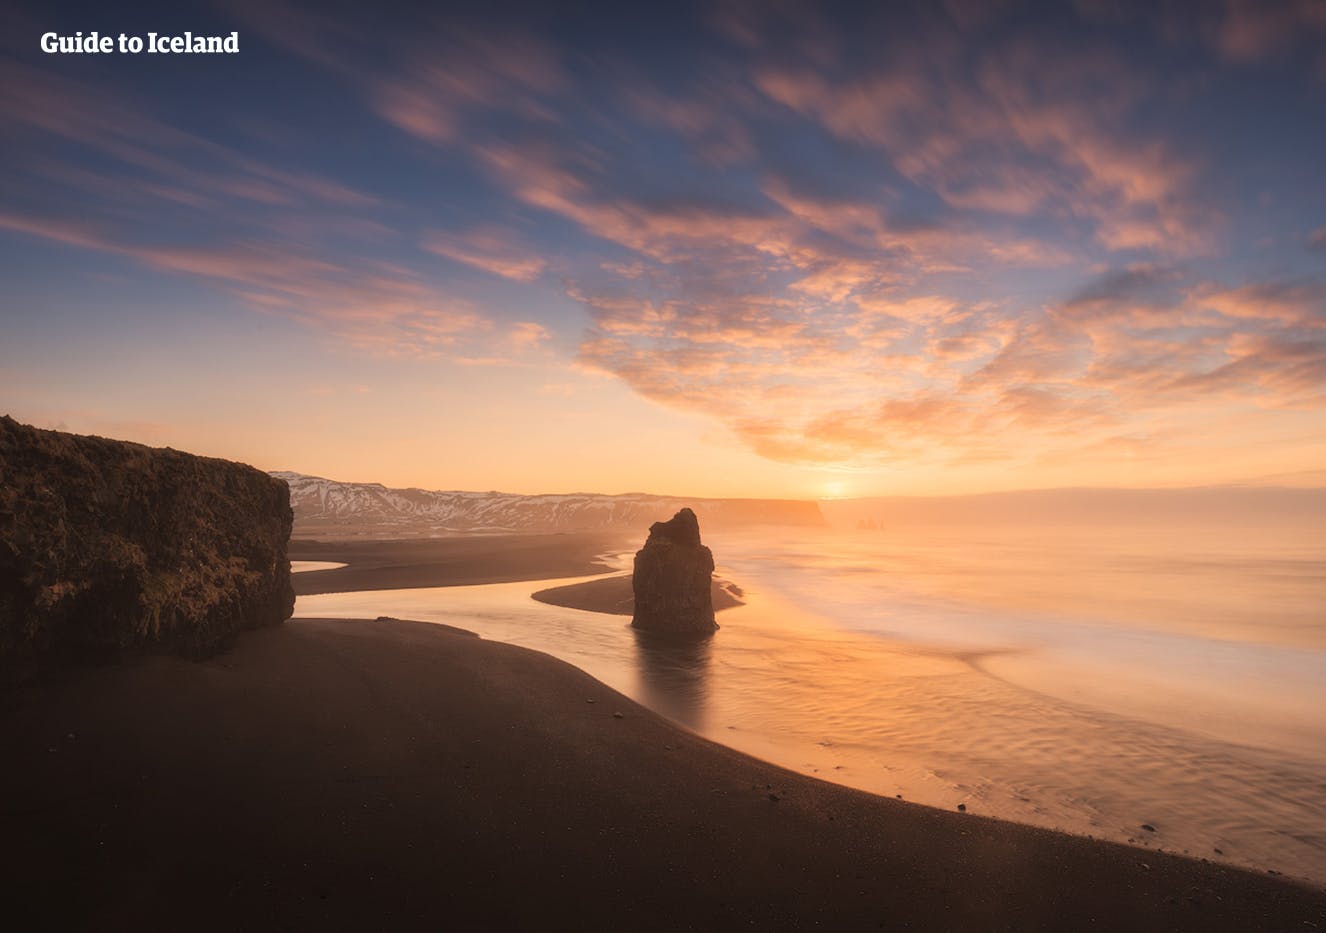 Reynisfjara black sand beach was used as a backdrop for some scenes in Game of Thrones season 7.